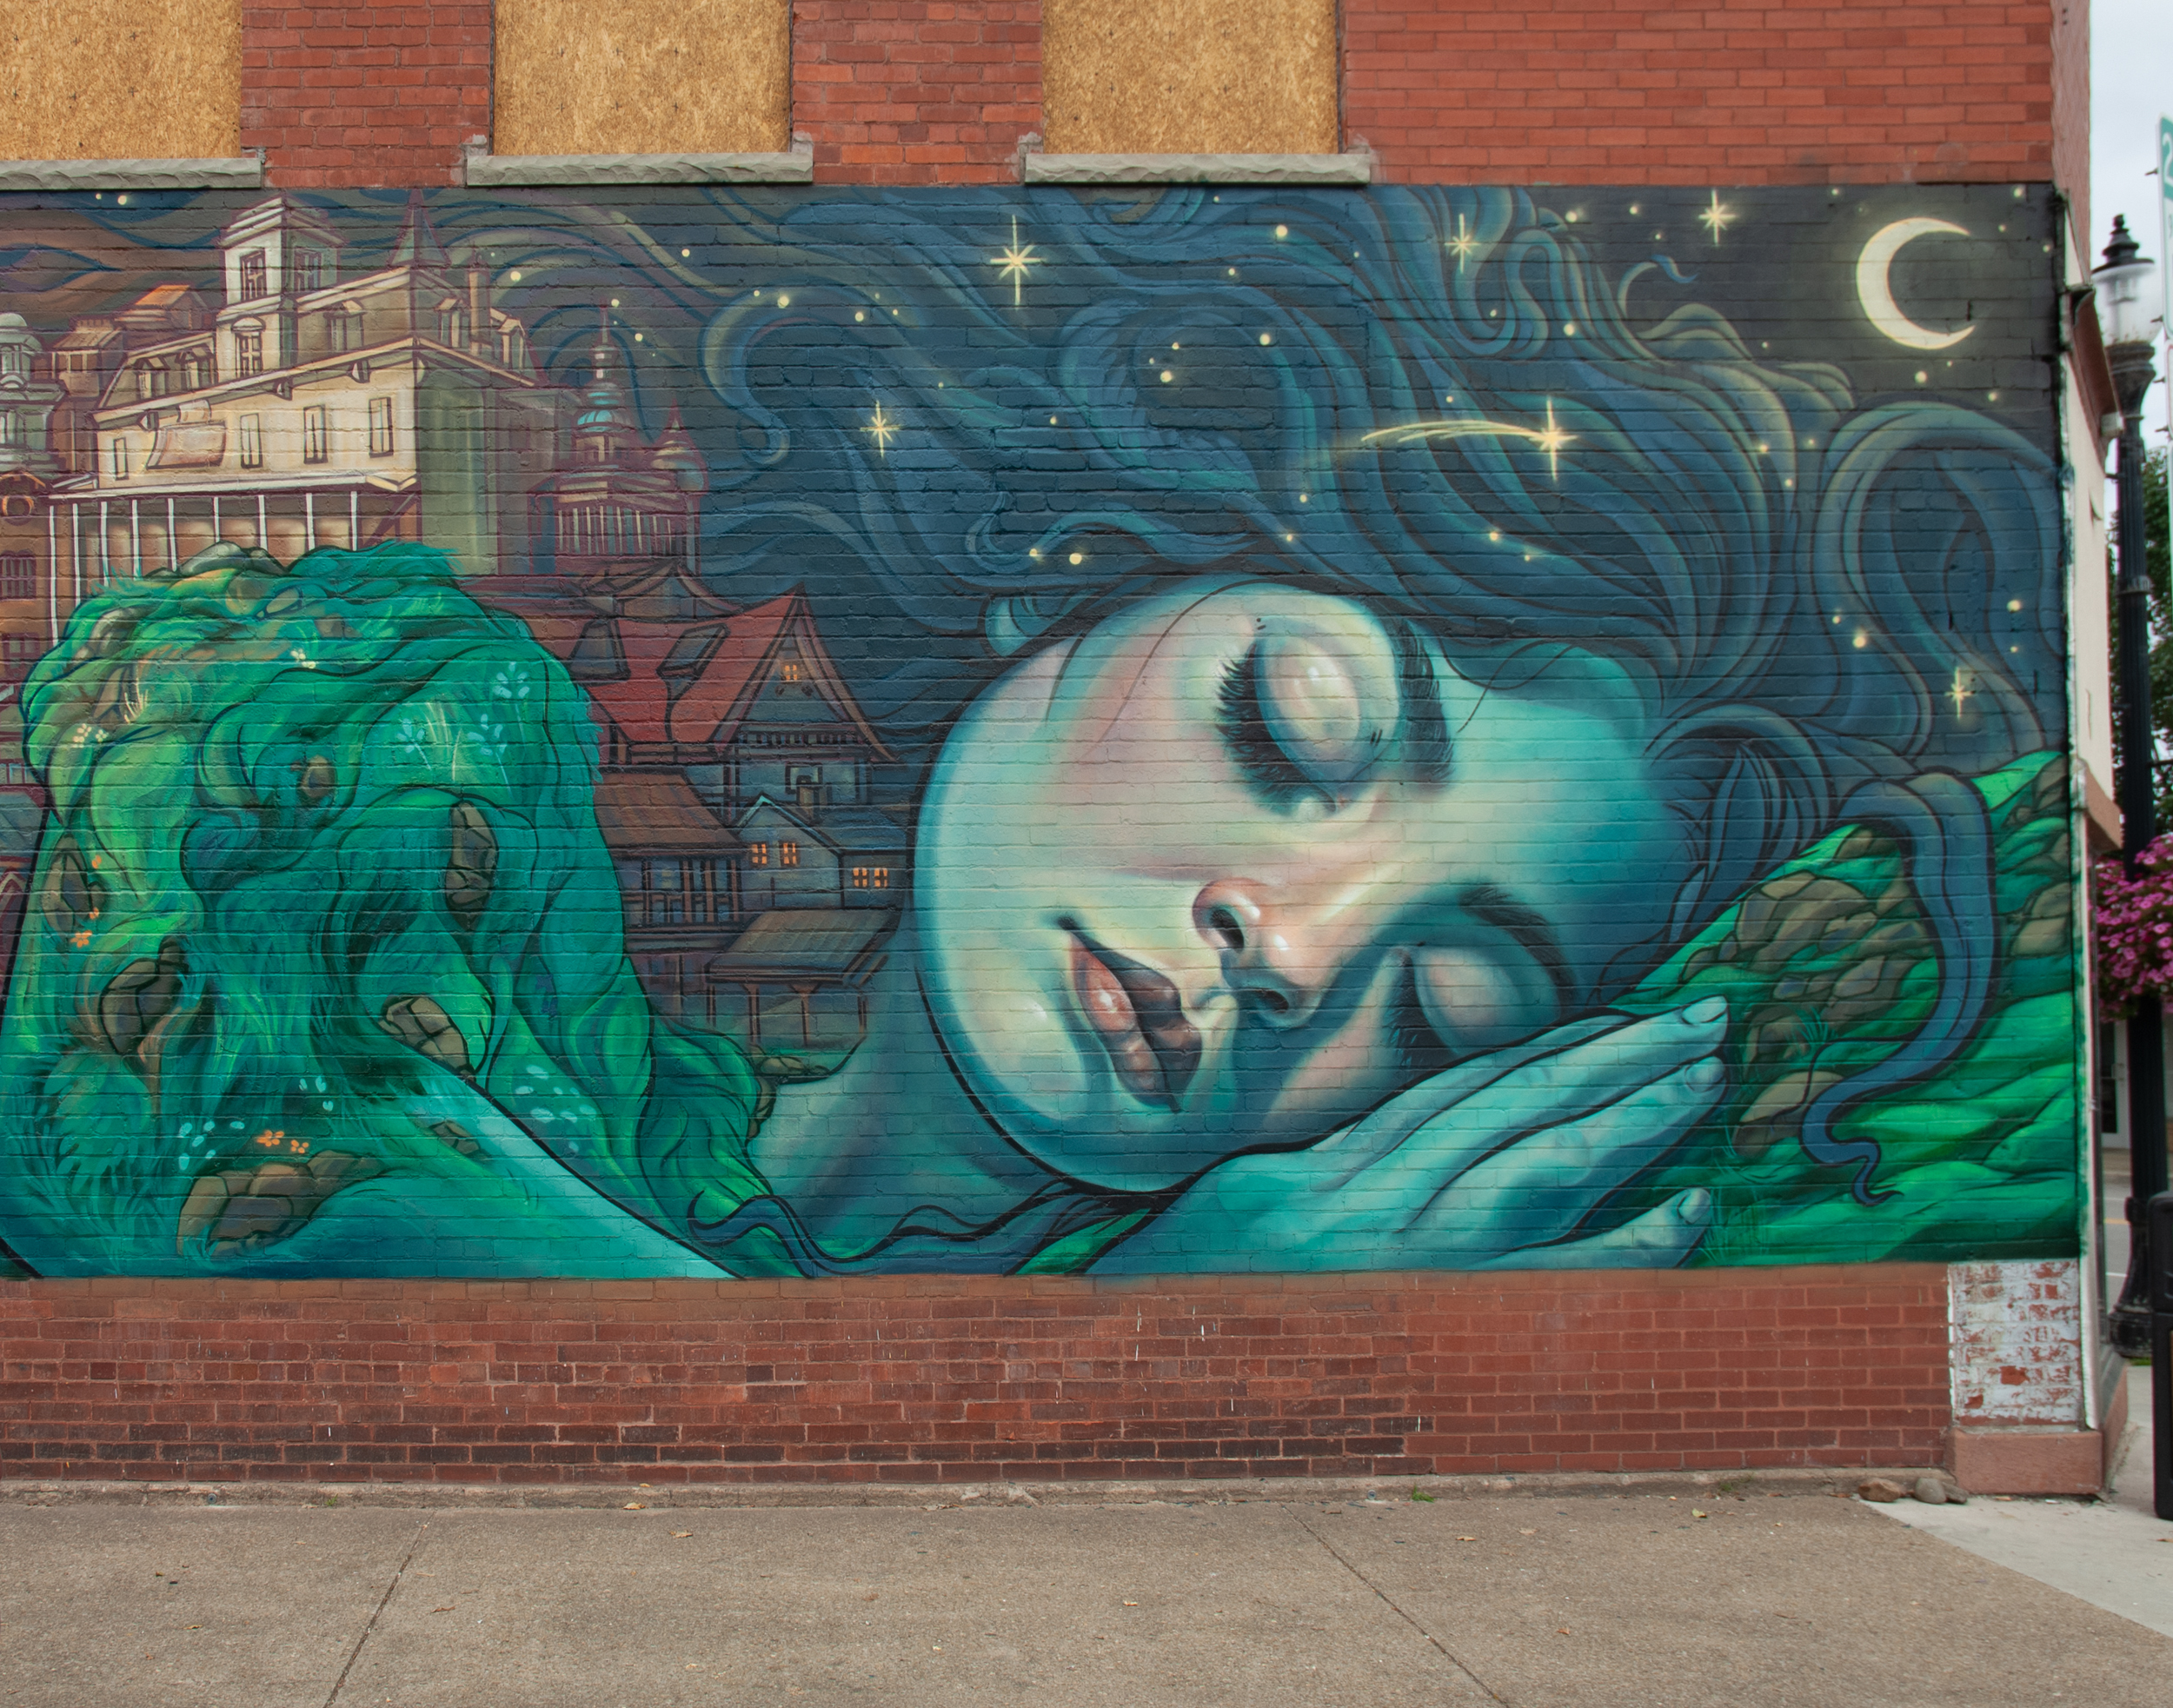 A mural of a green giant sleeping with head on hands